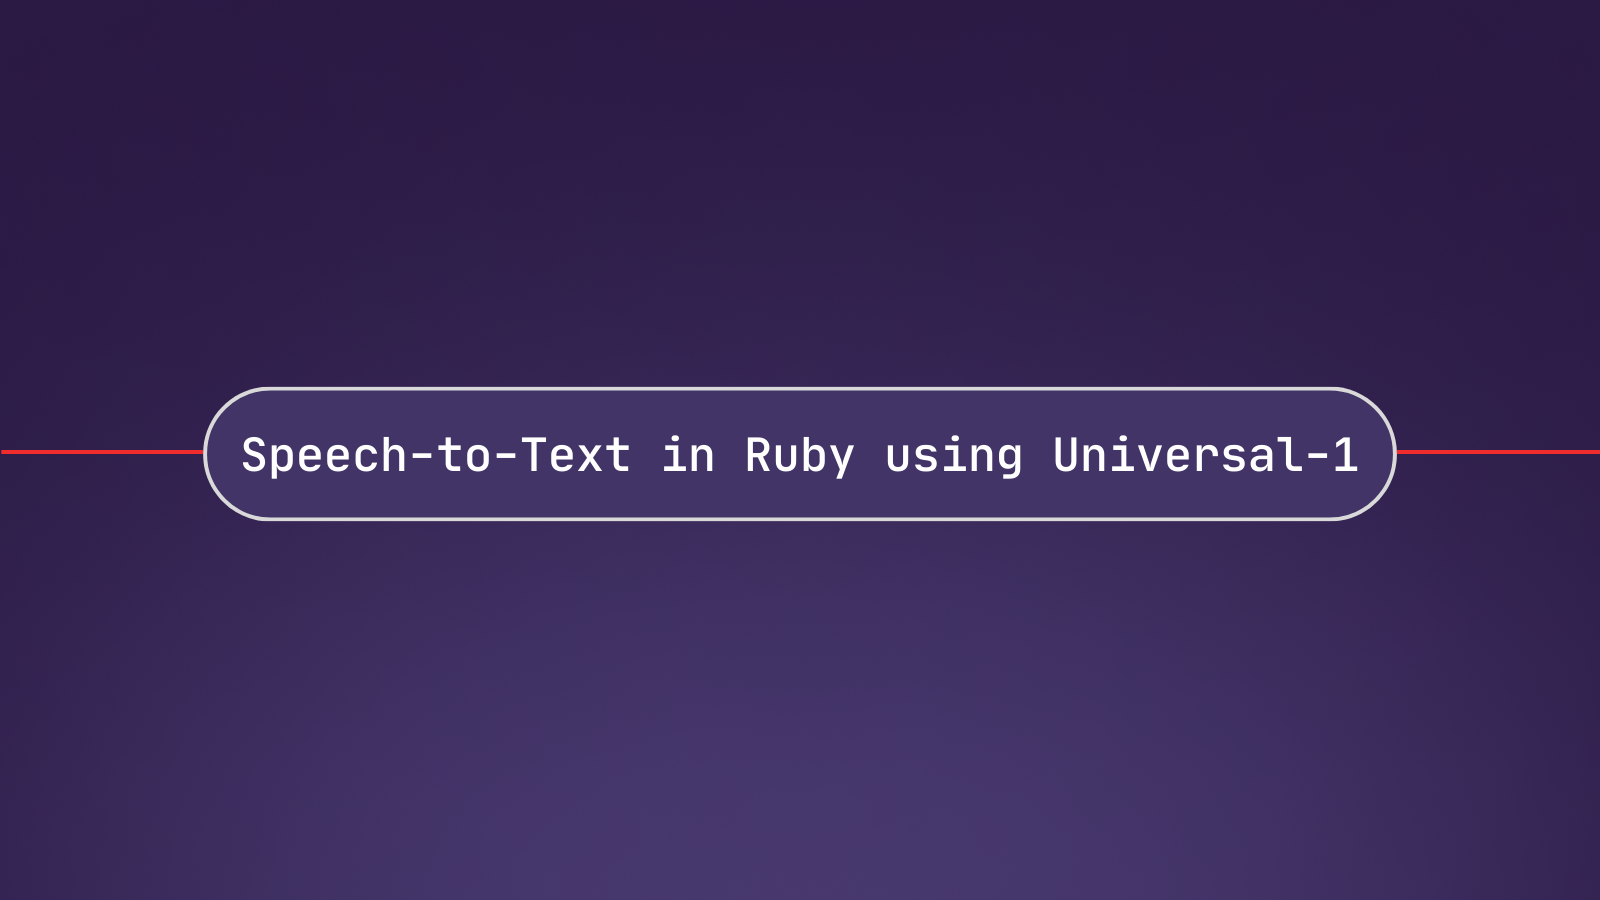 Speech-to-Text in Ruby using Universal-1